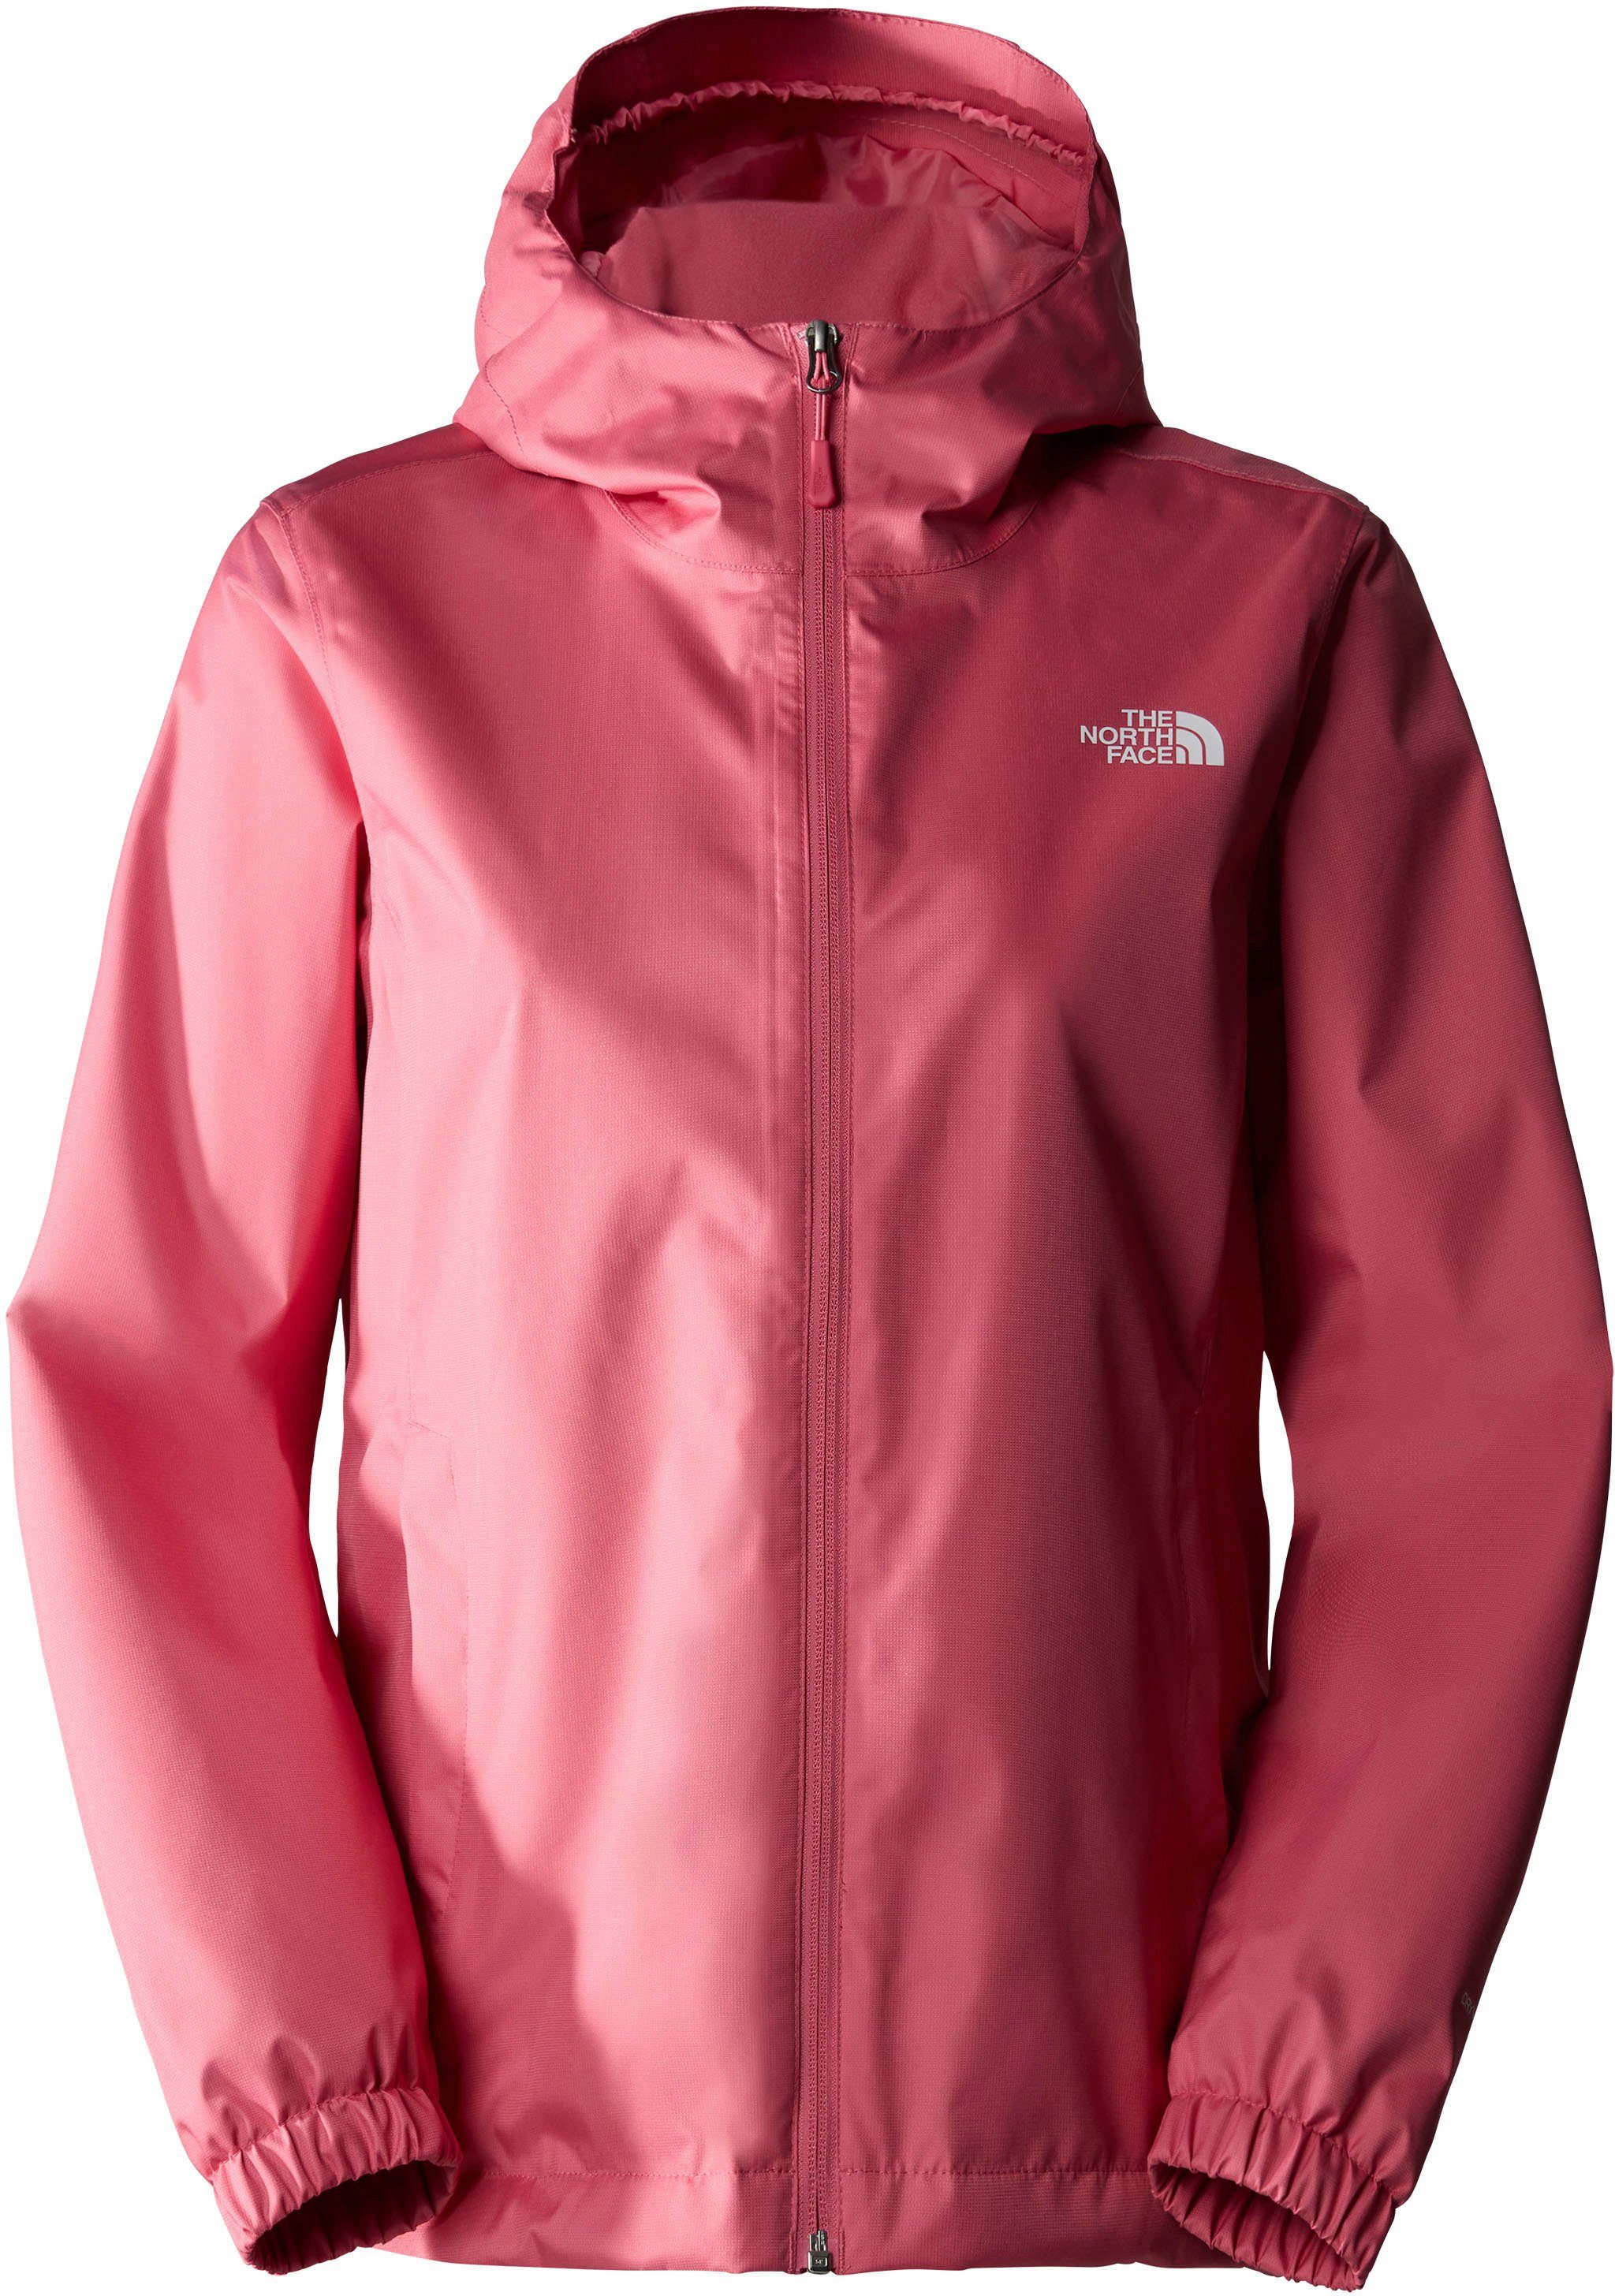 The Funktionsjacke W (1-St) pink Logostickerei JACKET North cosmo Face mit - QUEST EU